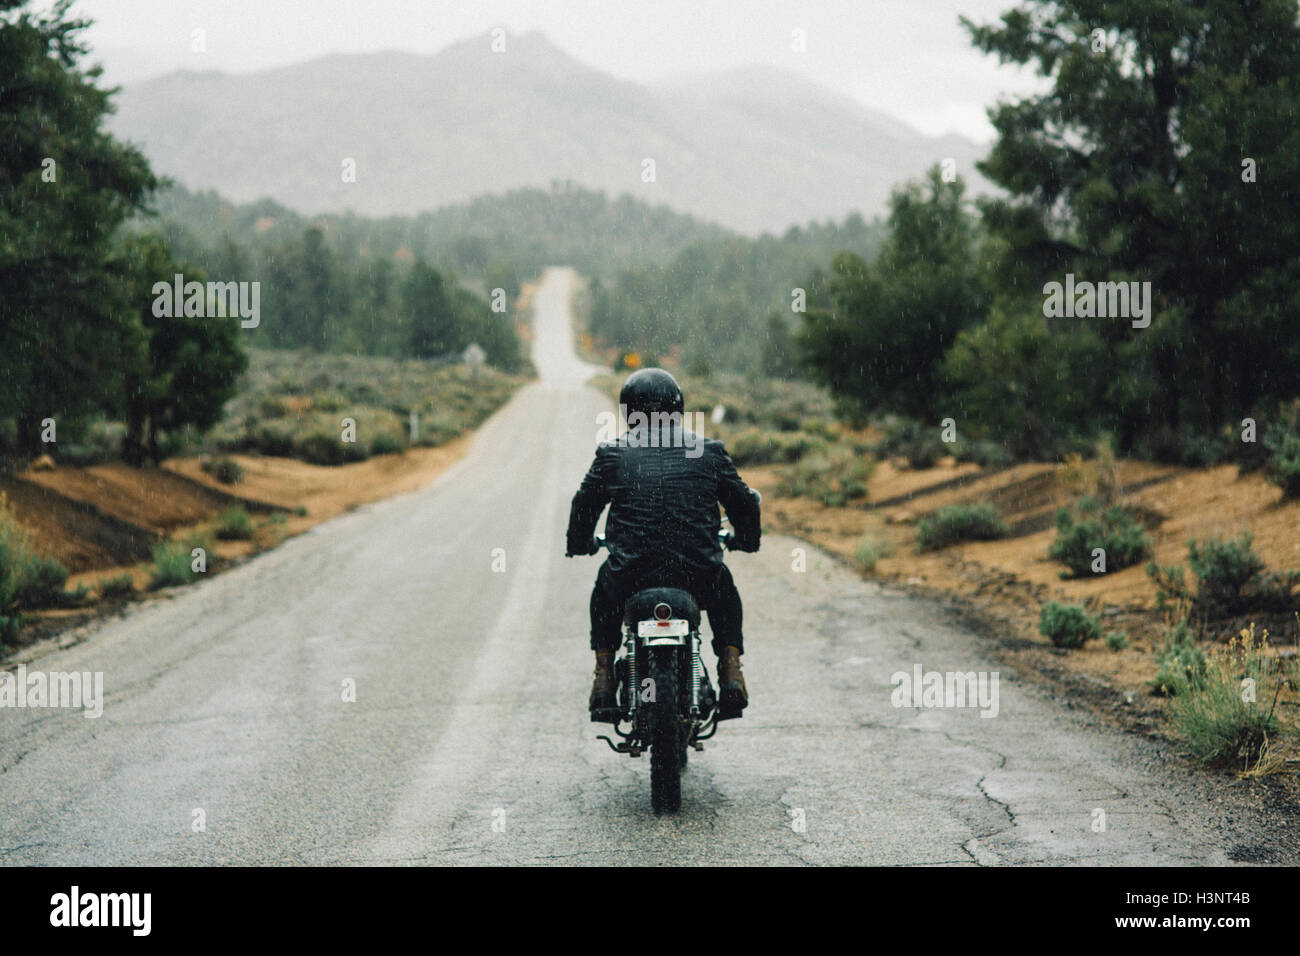 Rear view of motorcyclist riding motorbike on open road, Kennedy Meadows, California, USA Stock Photo